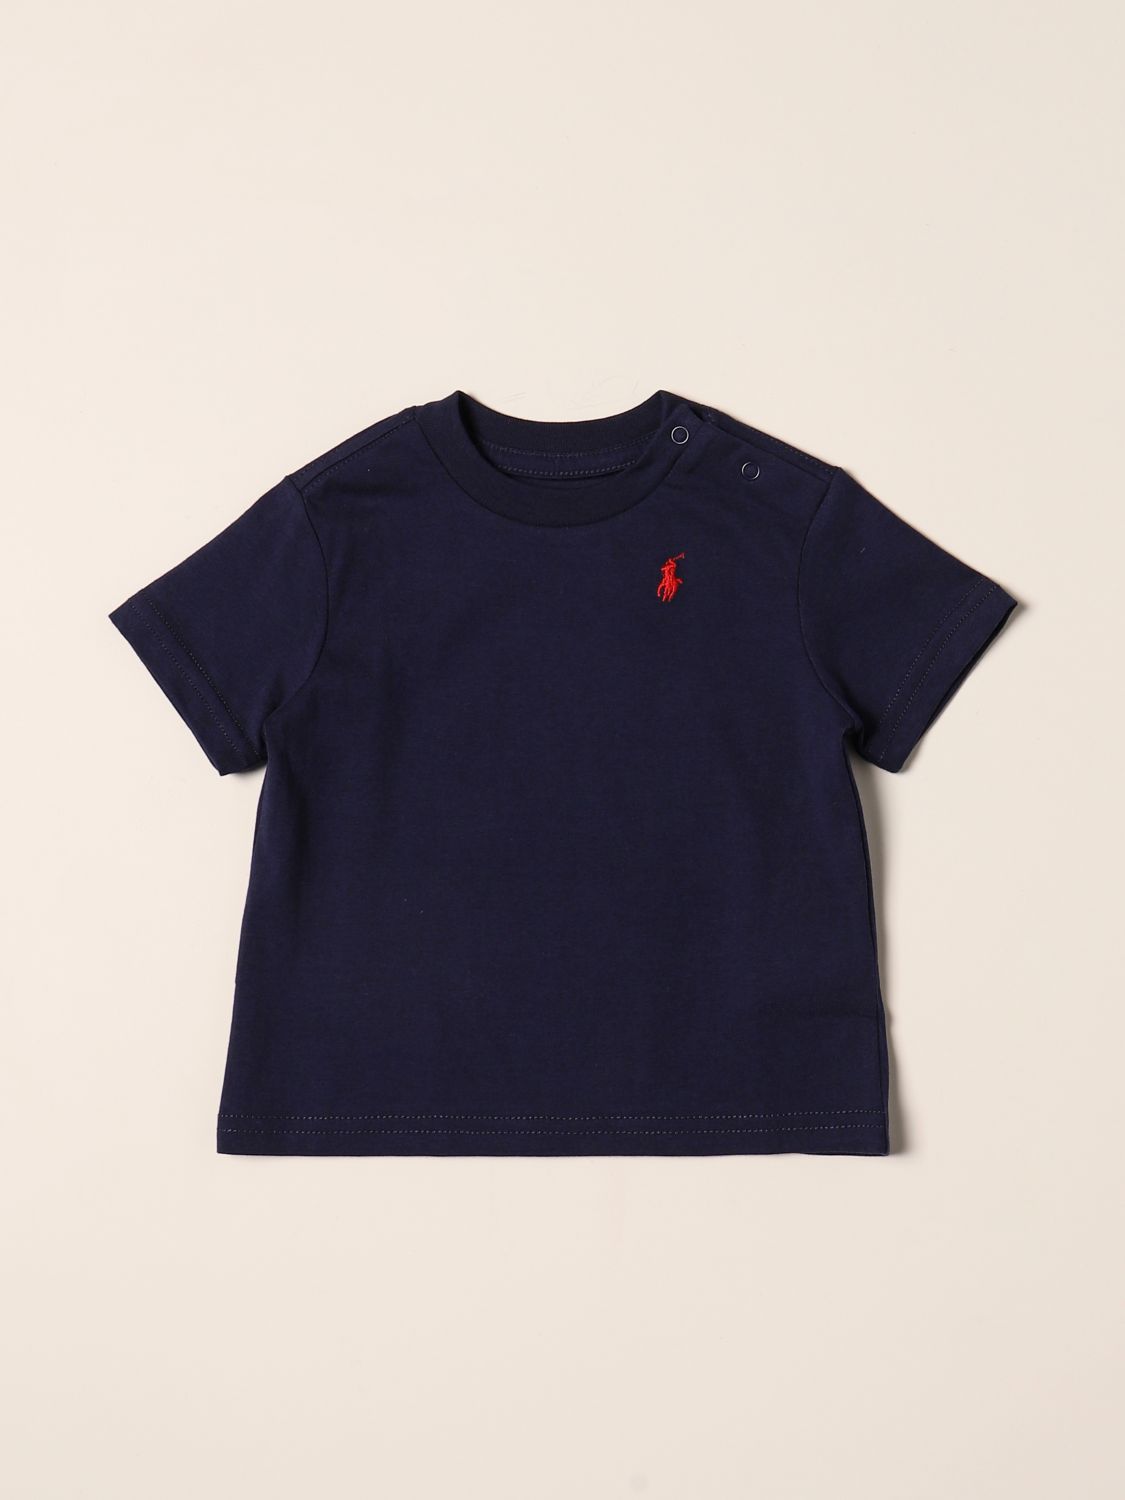 T-shirt Polo Ralph Lauren: T-shirt Polo Ralph Lauren in cotone blue navy 1